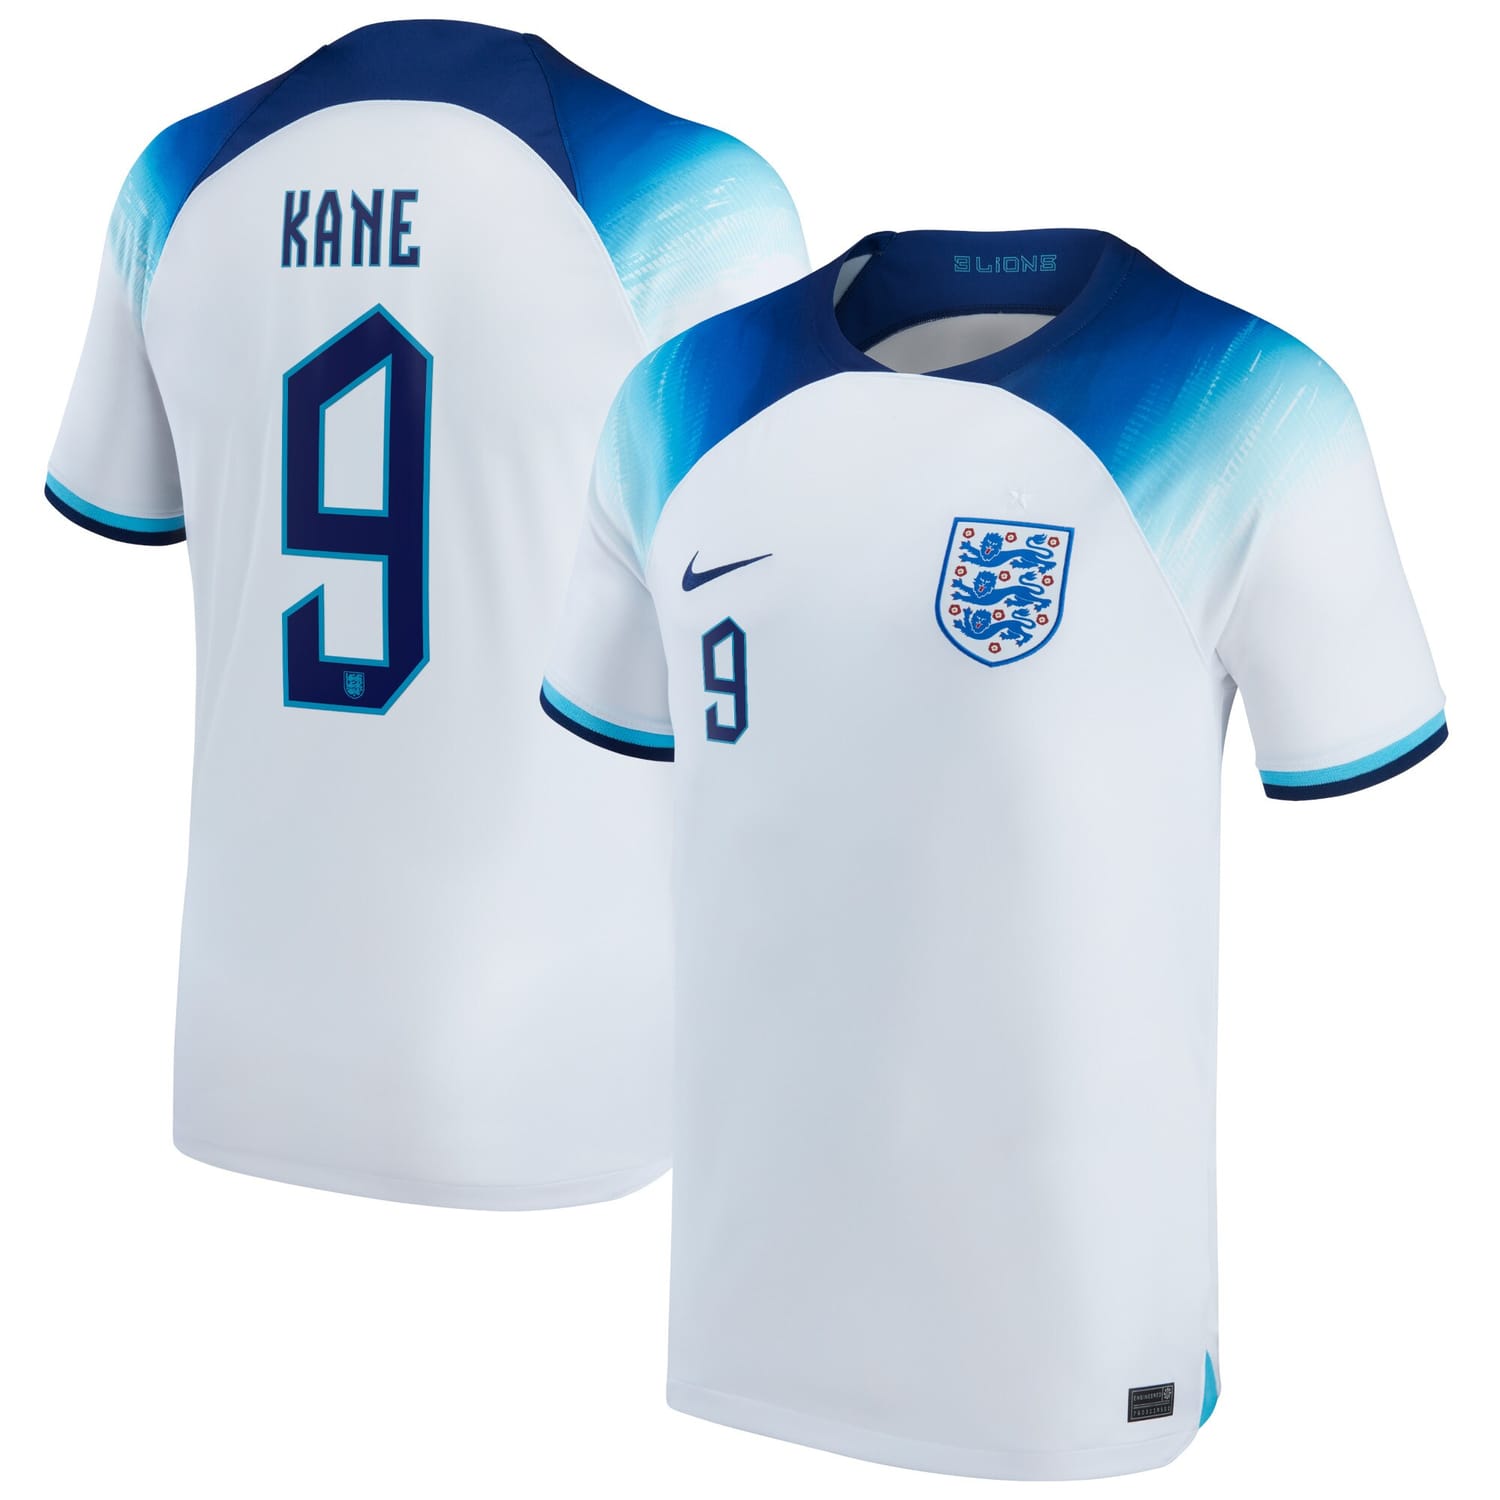 England National Team Home Jersey Shirt White 2022-23 player Harry Kane printing for Men